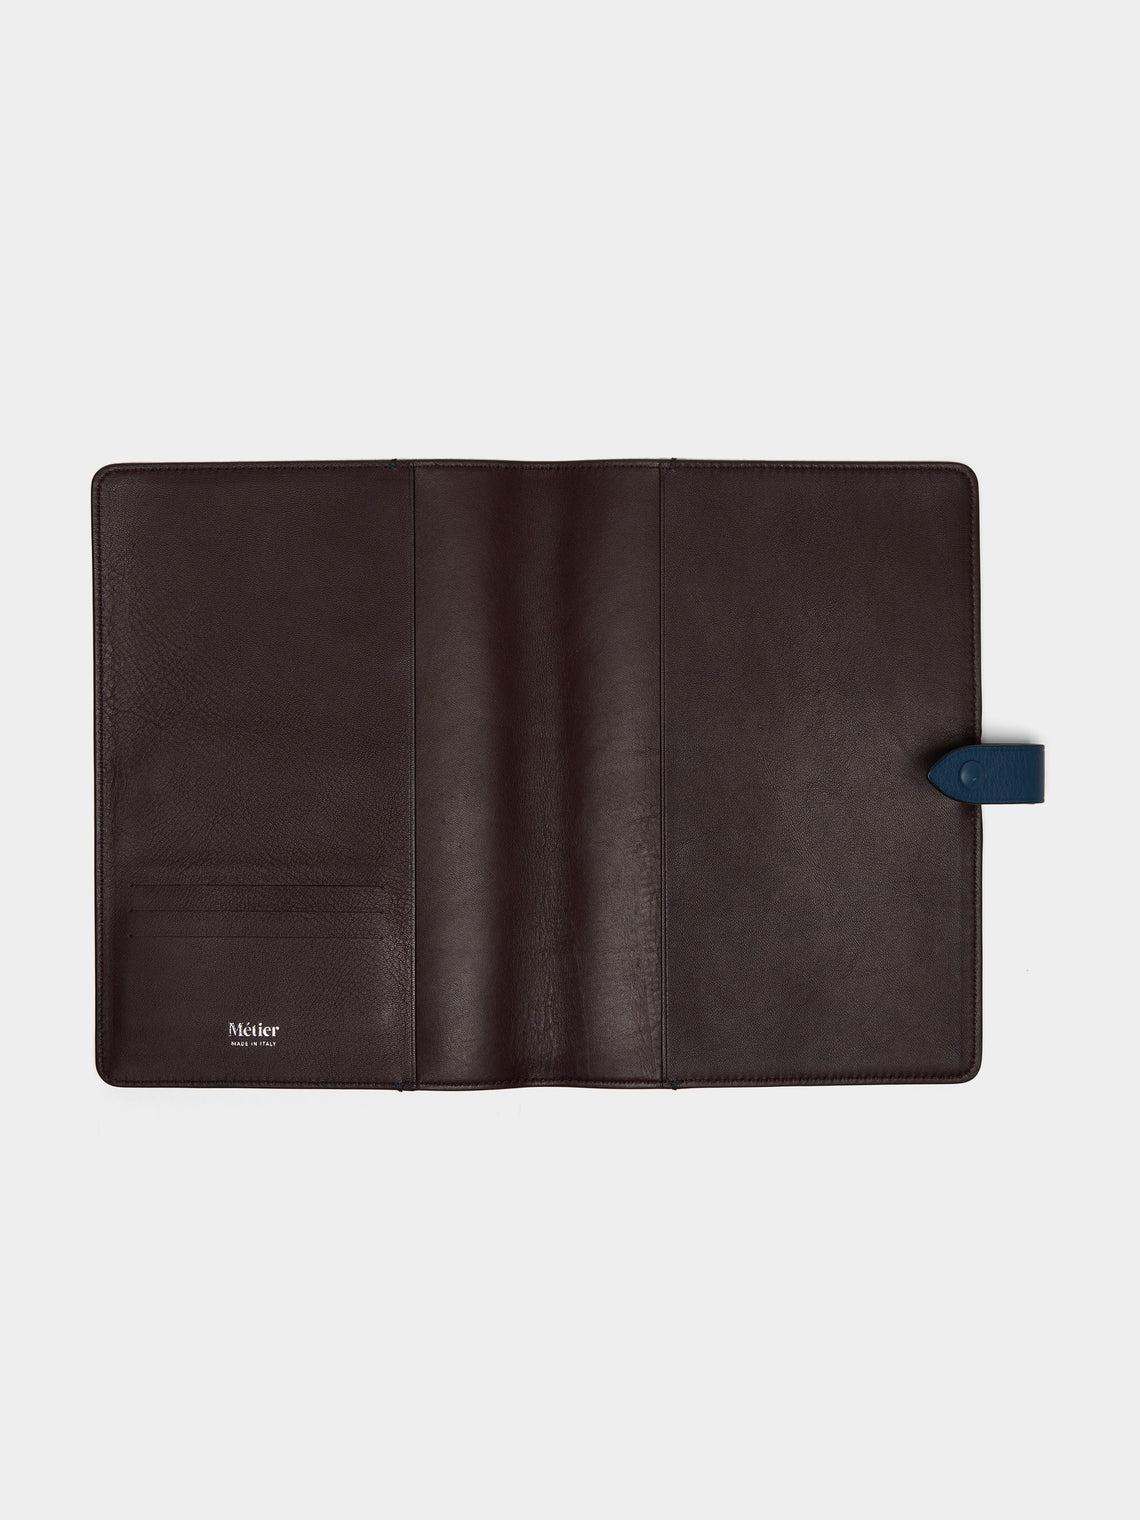 Métier - A5 Leather Notebook Cover - Blue - ABASK